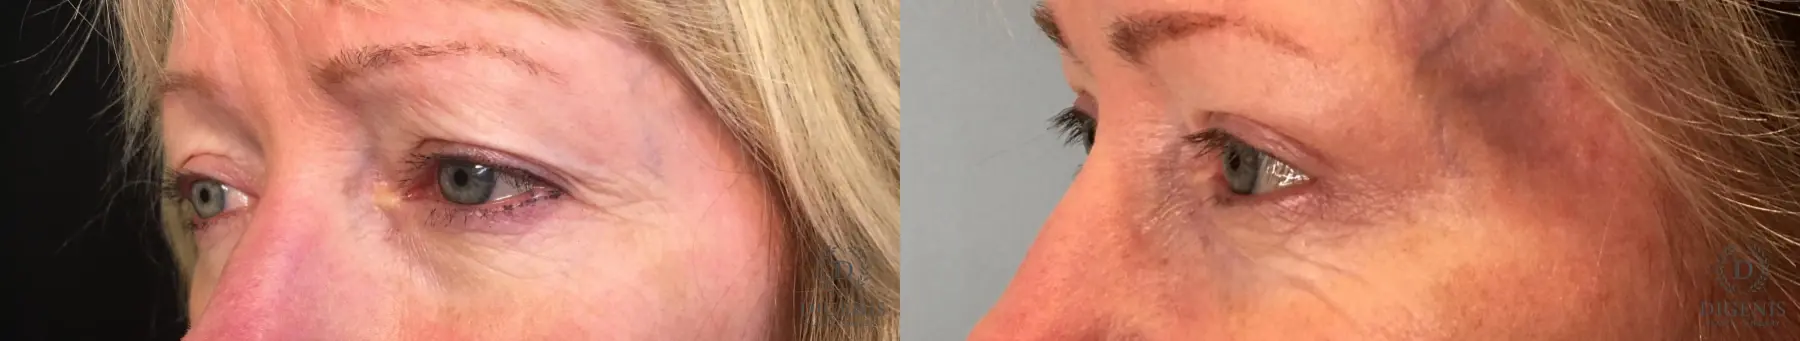 Eyelid Surgery: Patient 34 - Before and After 3